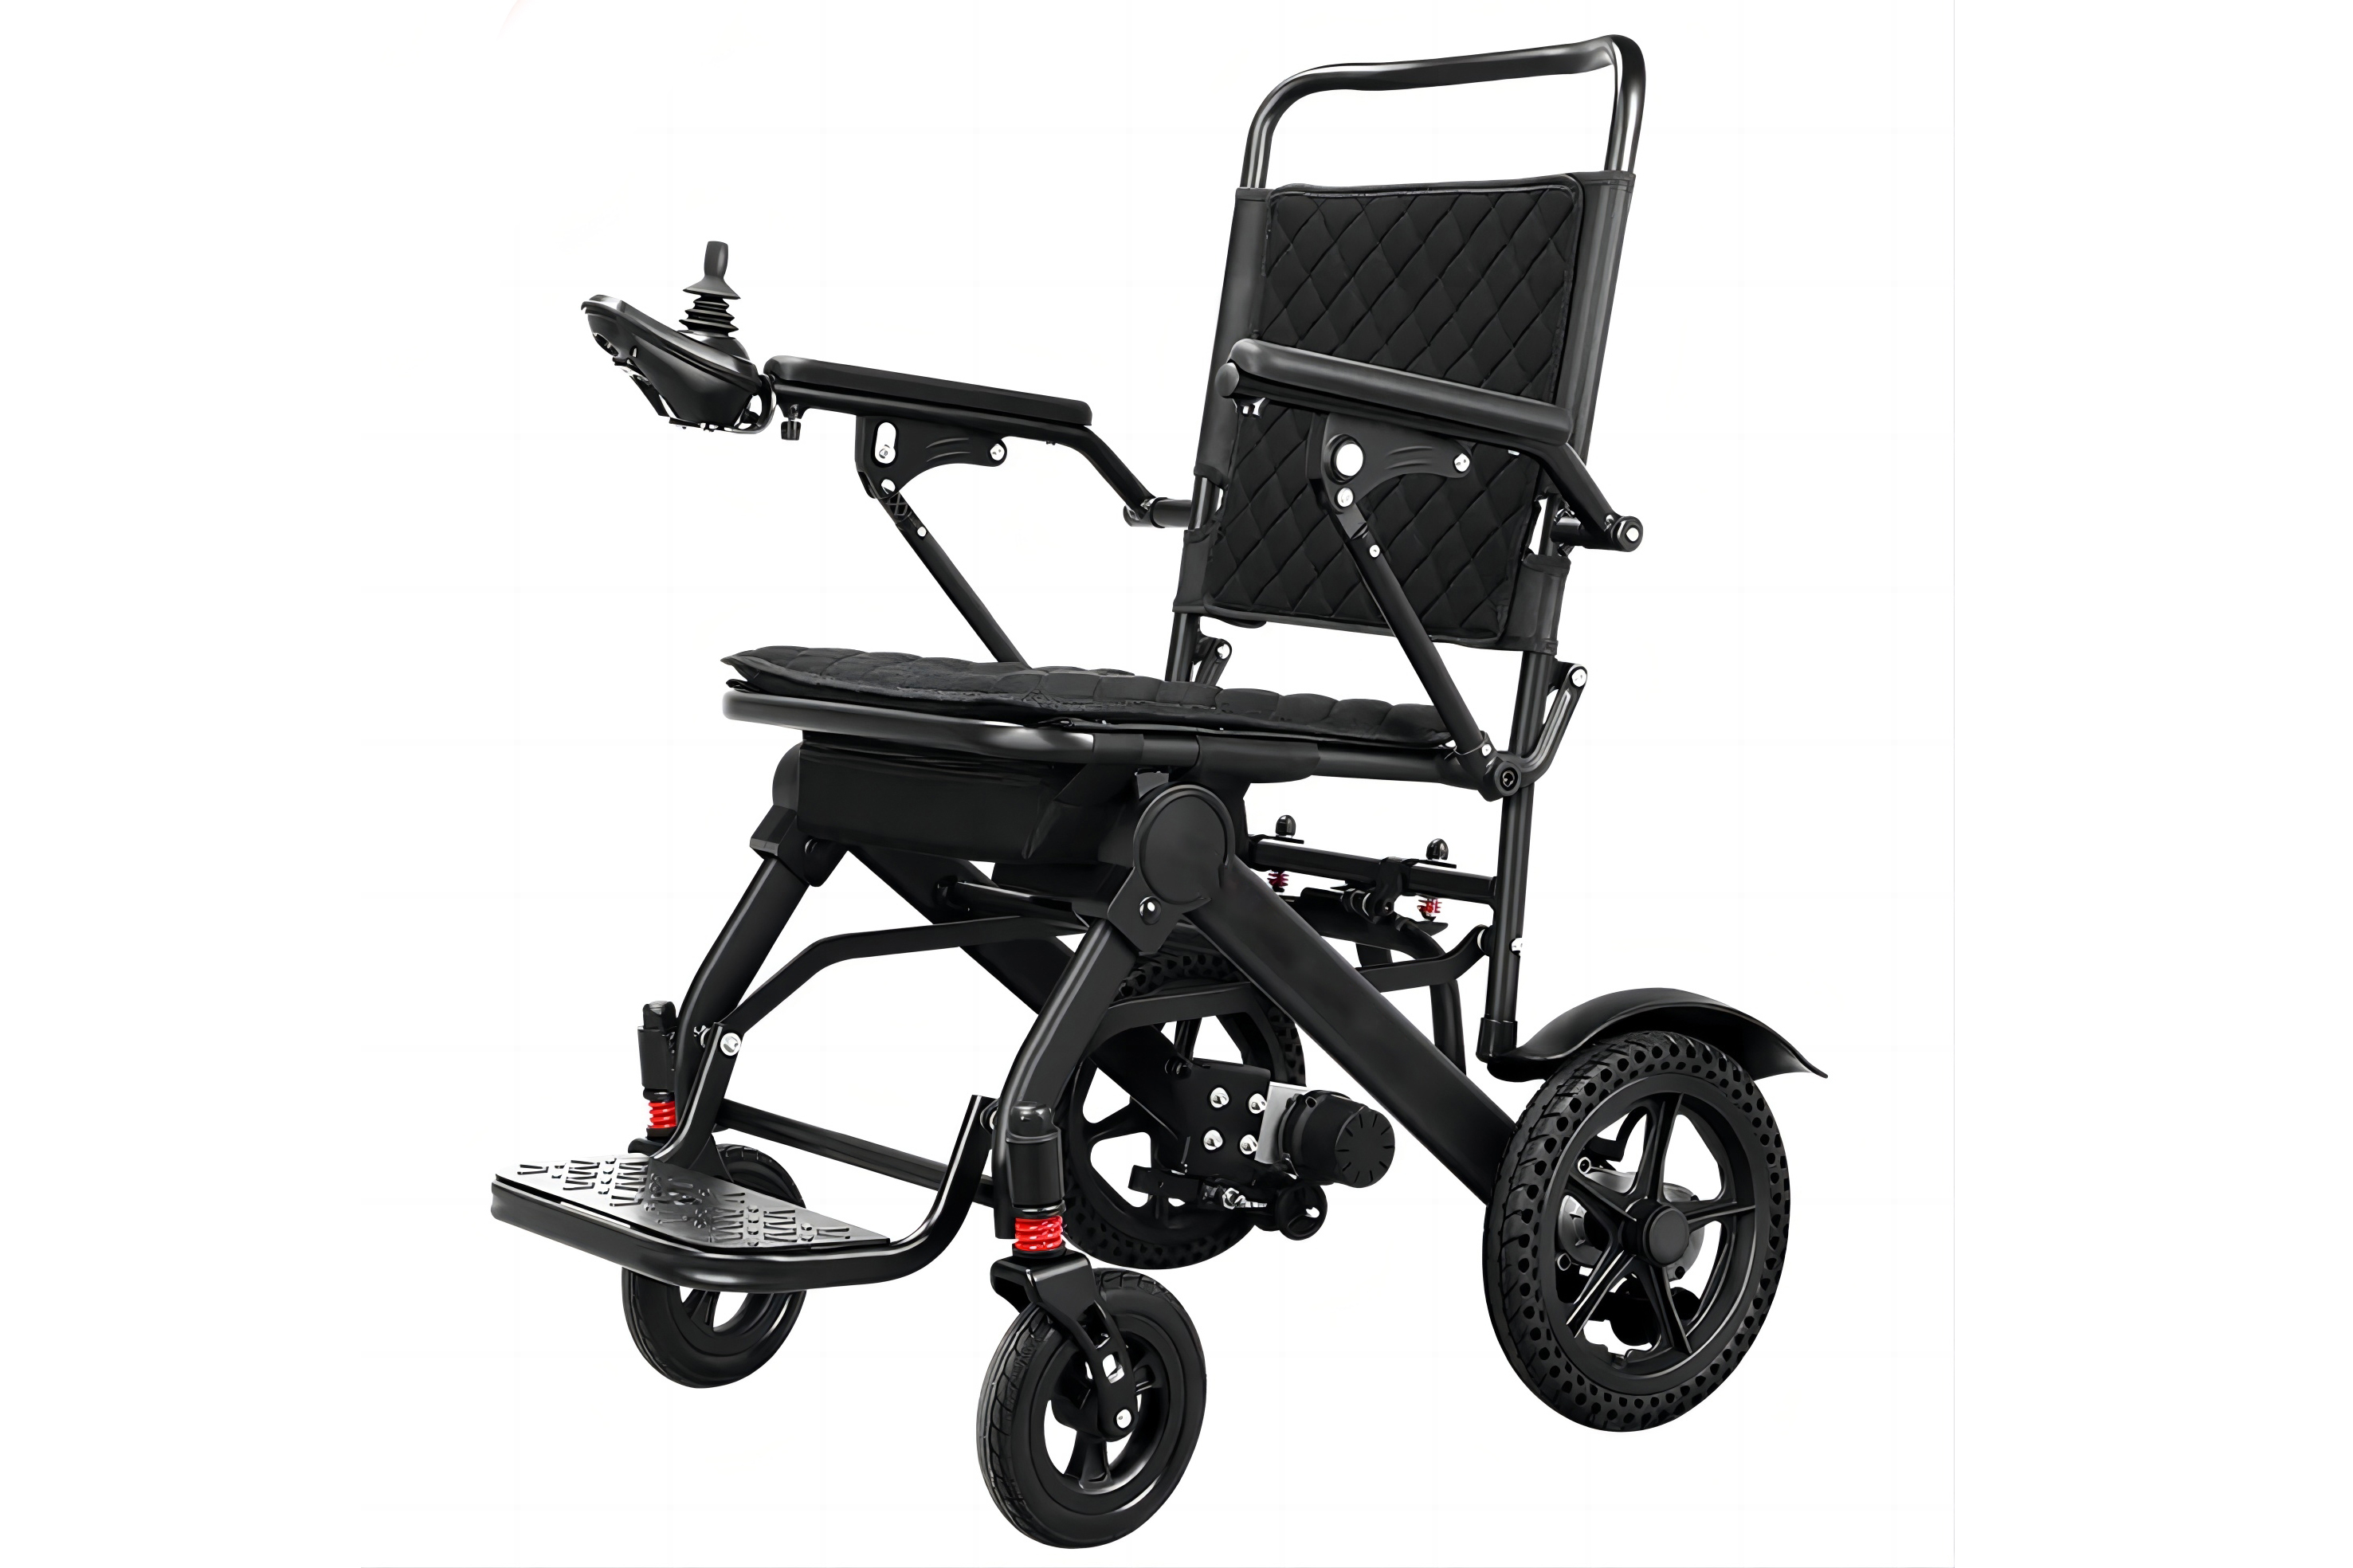 9 reasons to choose a lightweight foldable power wheelchair